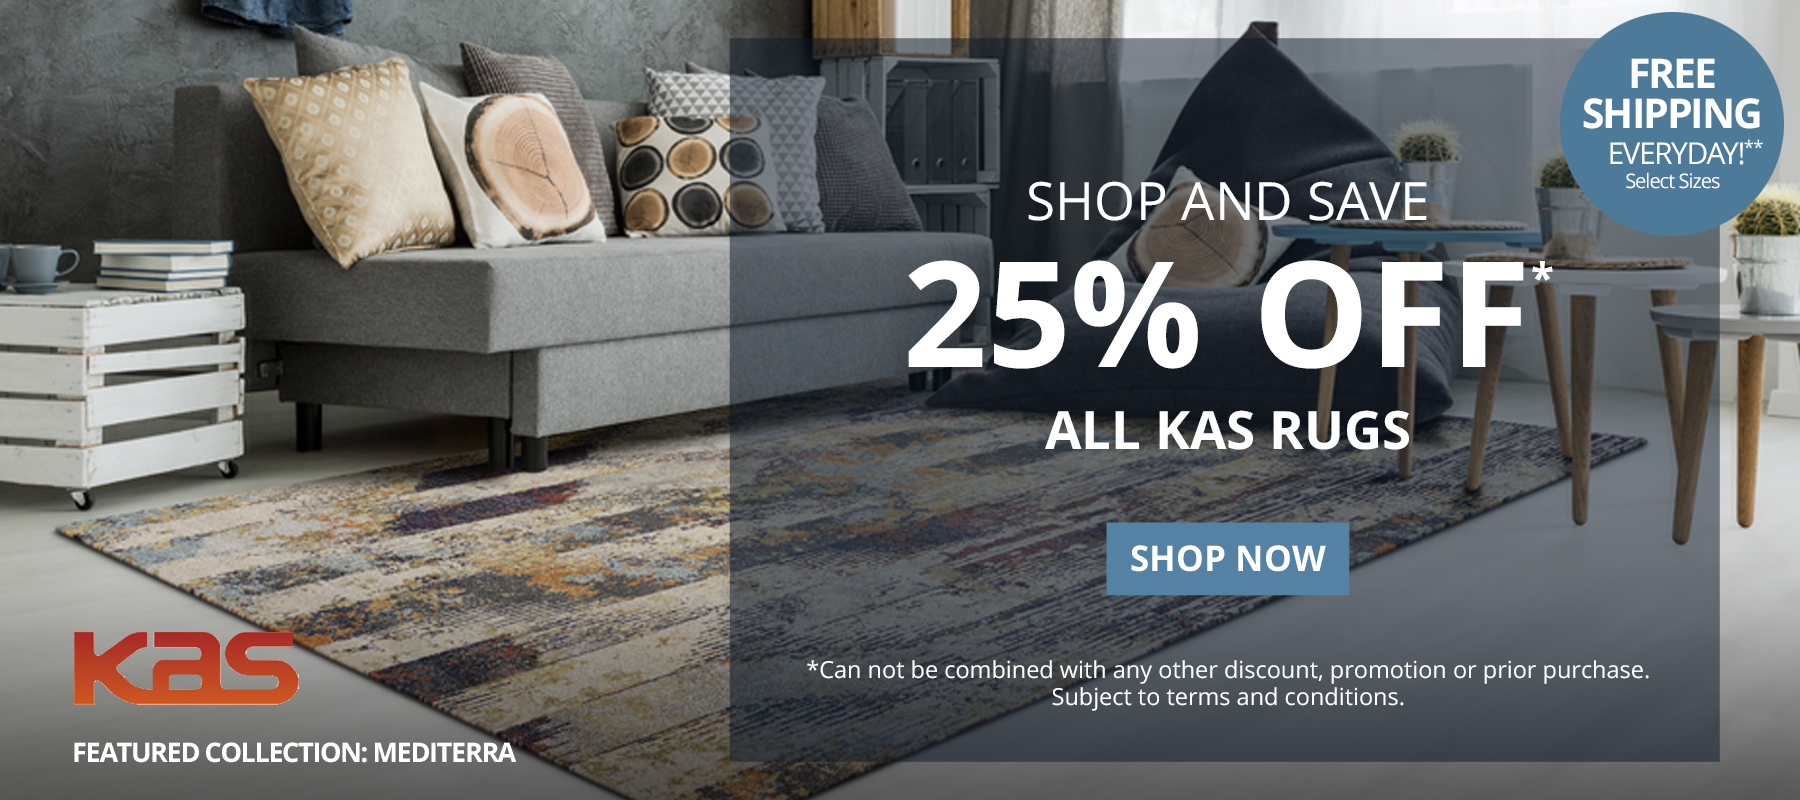 Shop and Save. 25% Off* All Kas Rugs. Free Shipping Everyday!** Select Sizes. *Can not be combined with any other discount, promotion or prior purchase. Subject to terms and conditions. Shop Now.